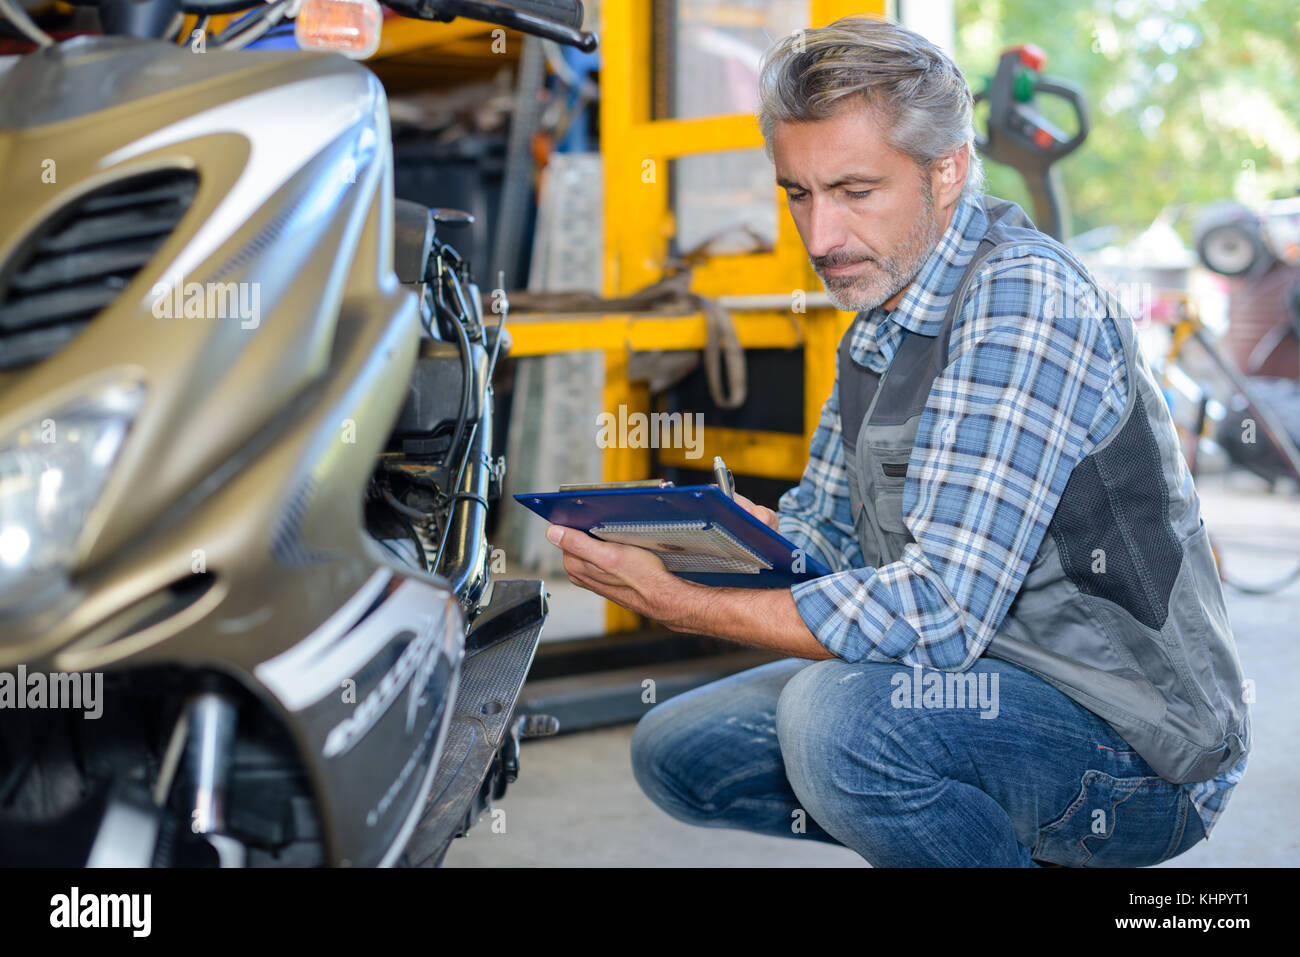 Mechanic crouched beside scooter holding clipboard Stock Photo